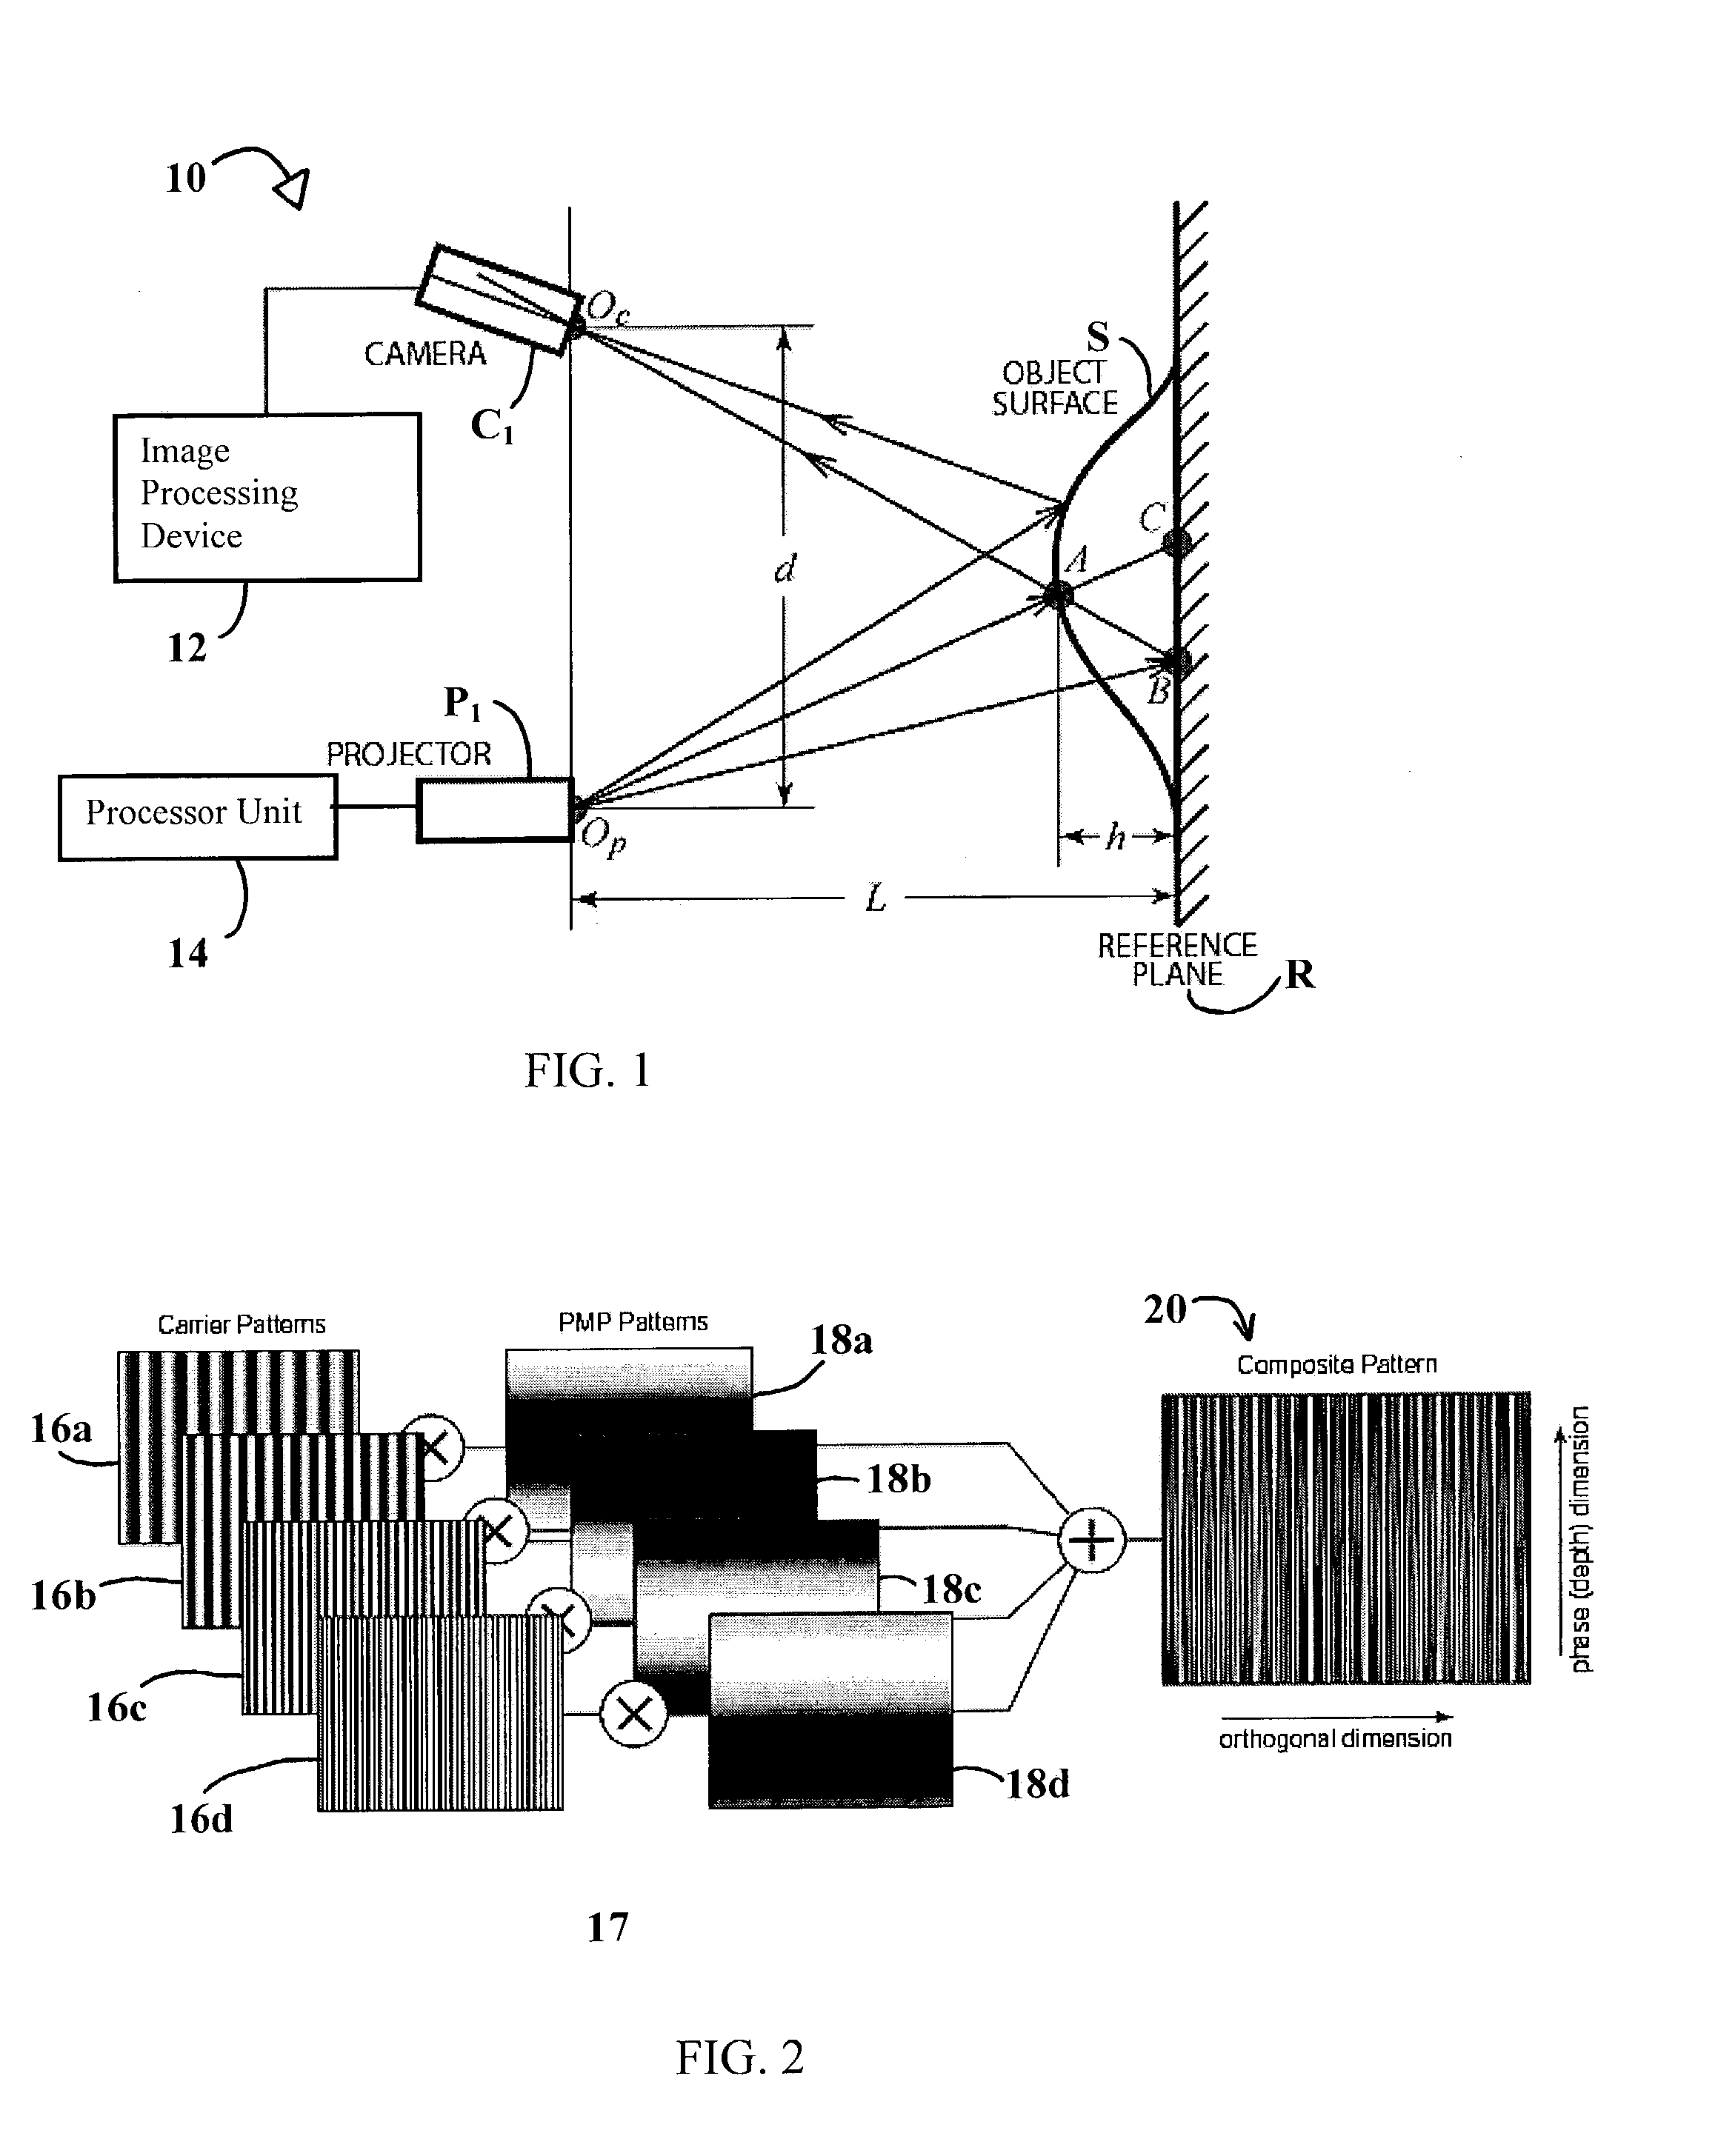 System and technique for retrieving depth information about a surface by projecting a composite image of modulated light patterns